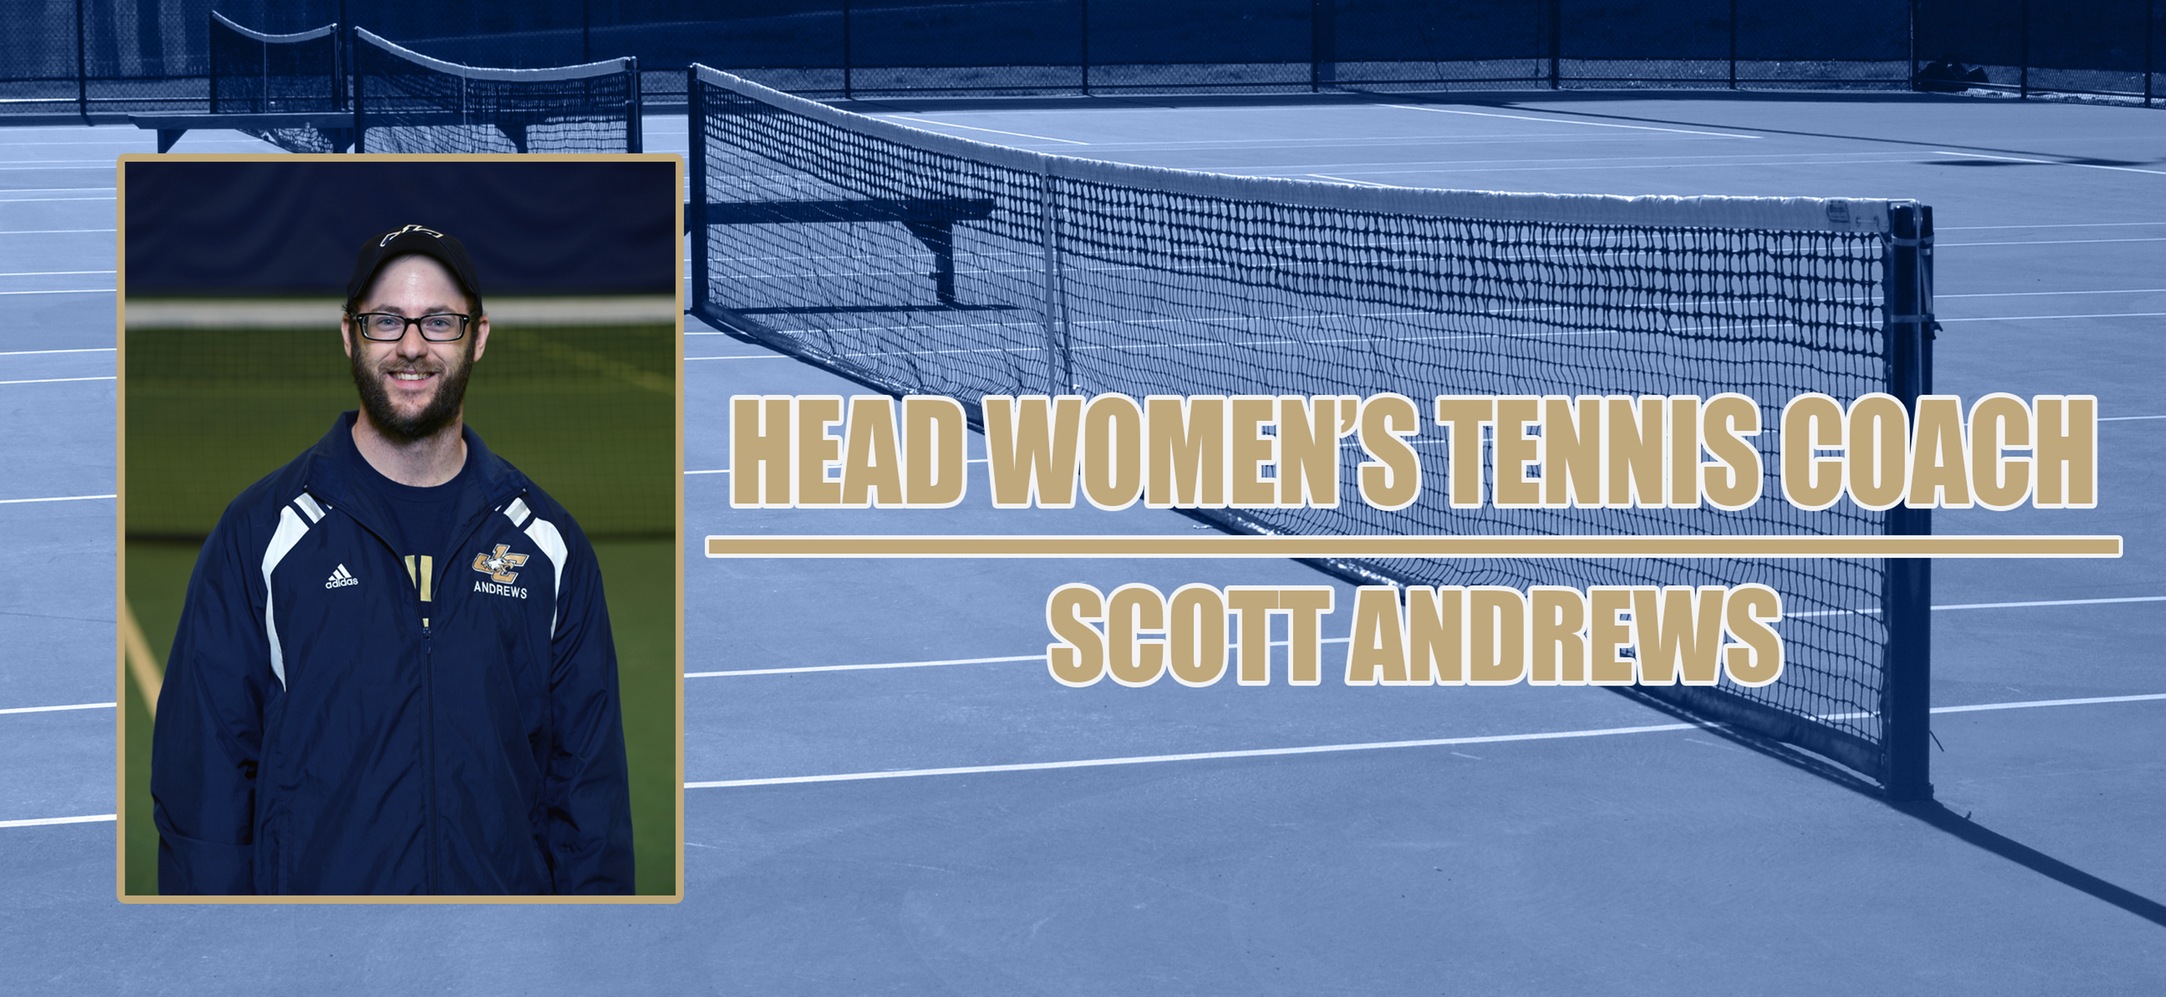 Andrews Tabbed to Lead Women's Tennis